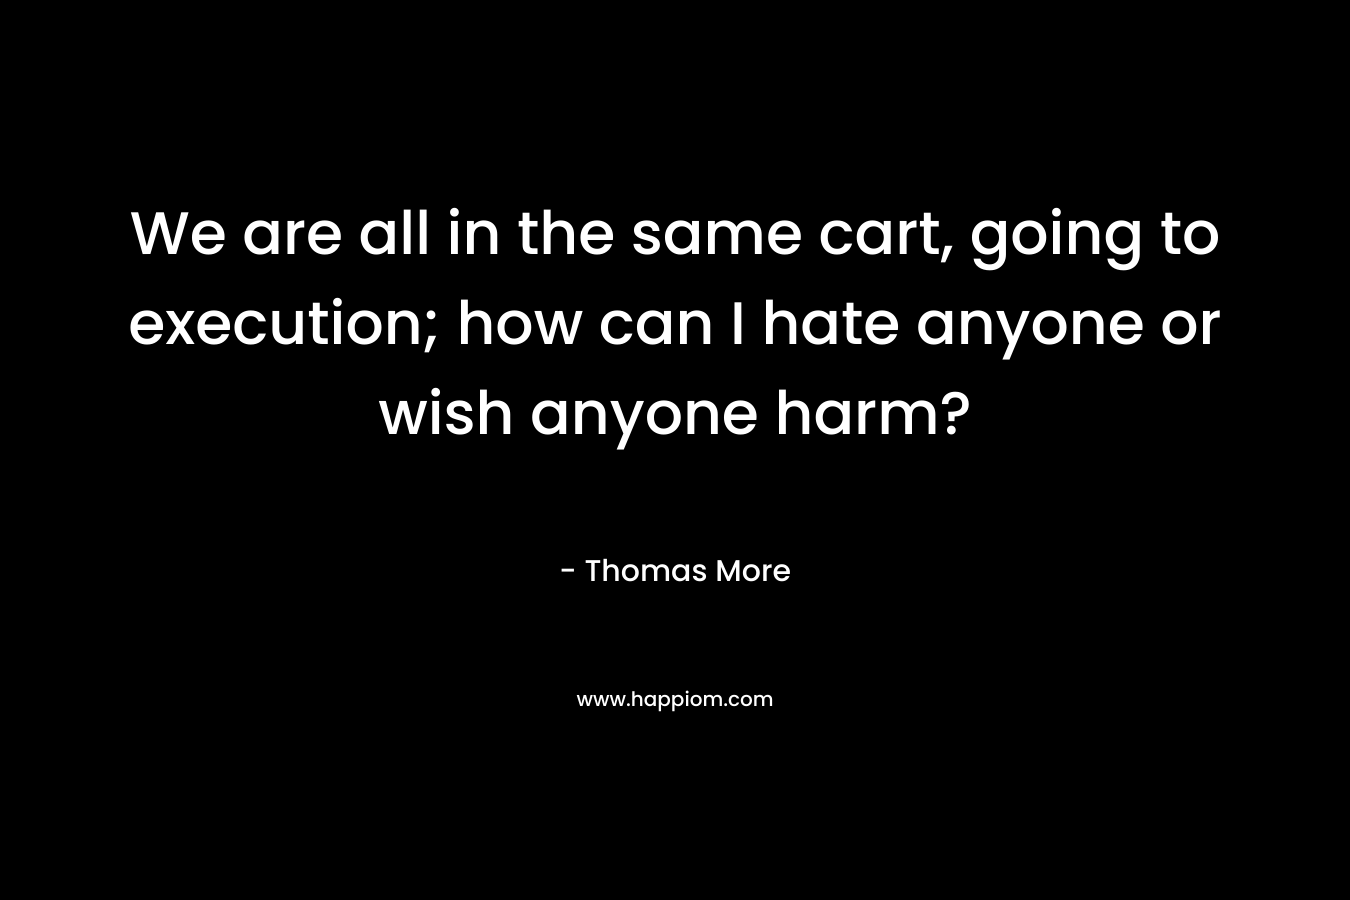 We are all in the same cart, going to execution; how can I hate anyone or wish anyone harm? – Thomas More